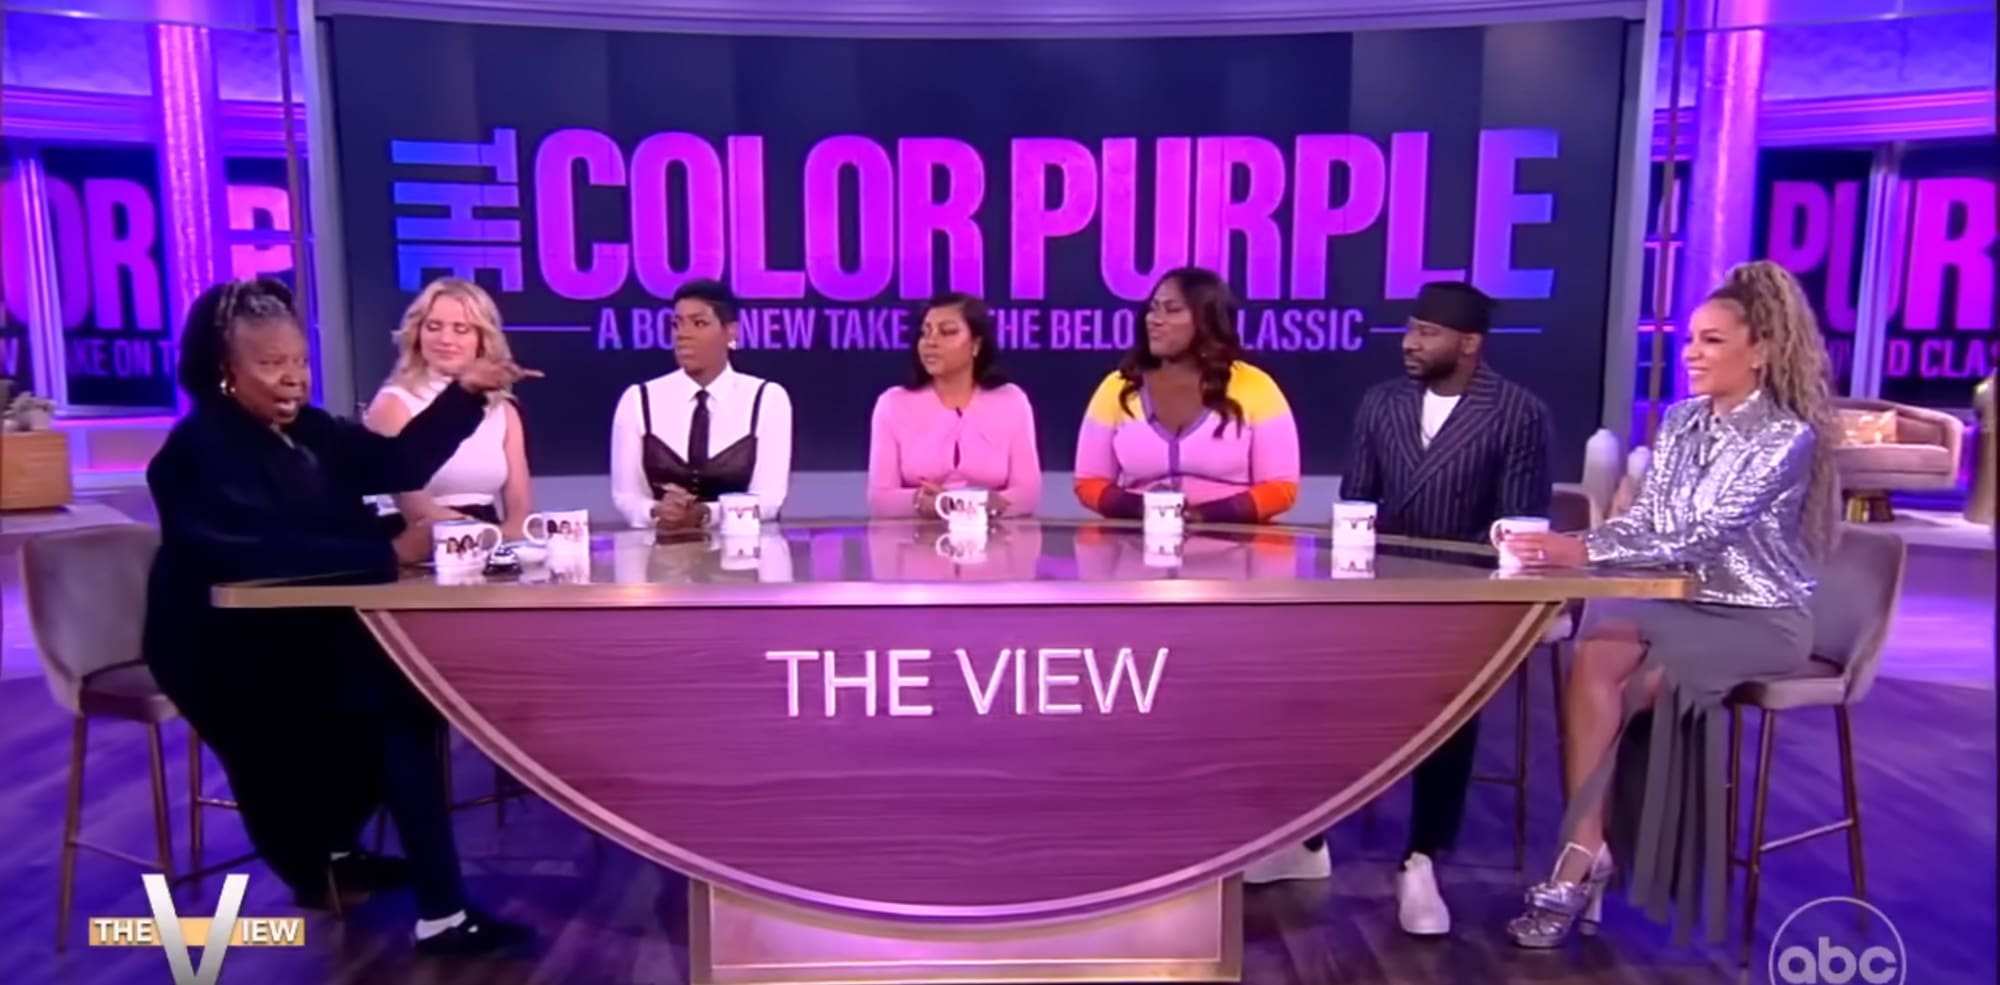 Did Oprah Winfrey Diss ‘The View’ During ‘Color Purple’ Promo Run? ‘The View’ Is ‘Pissed,’ Source Says